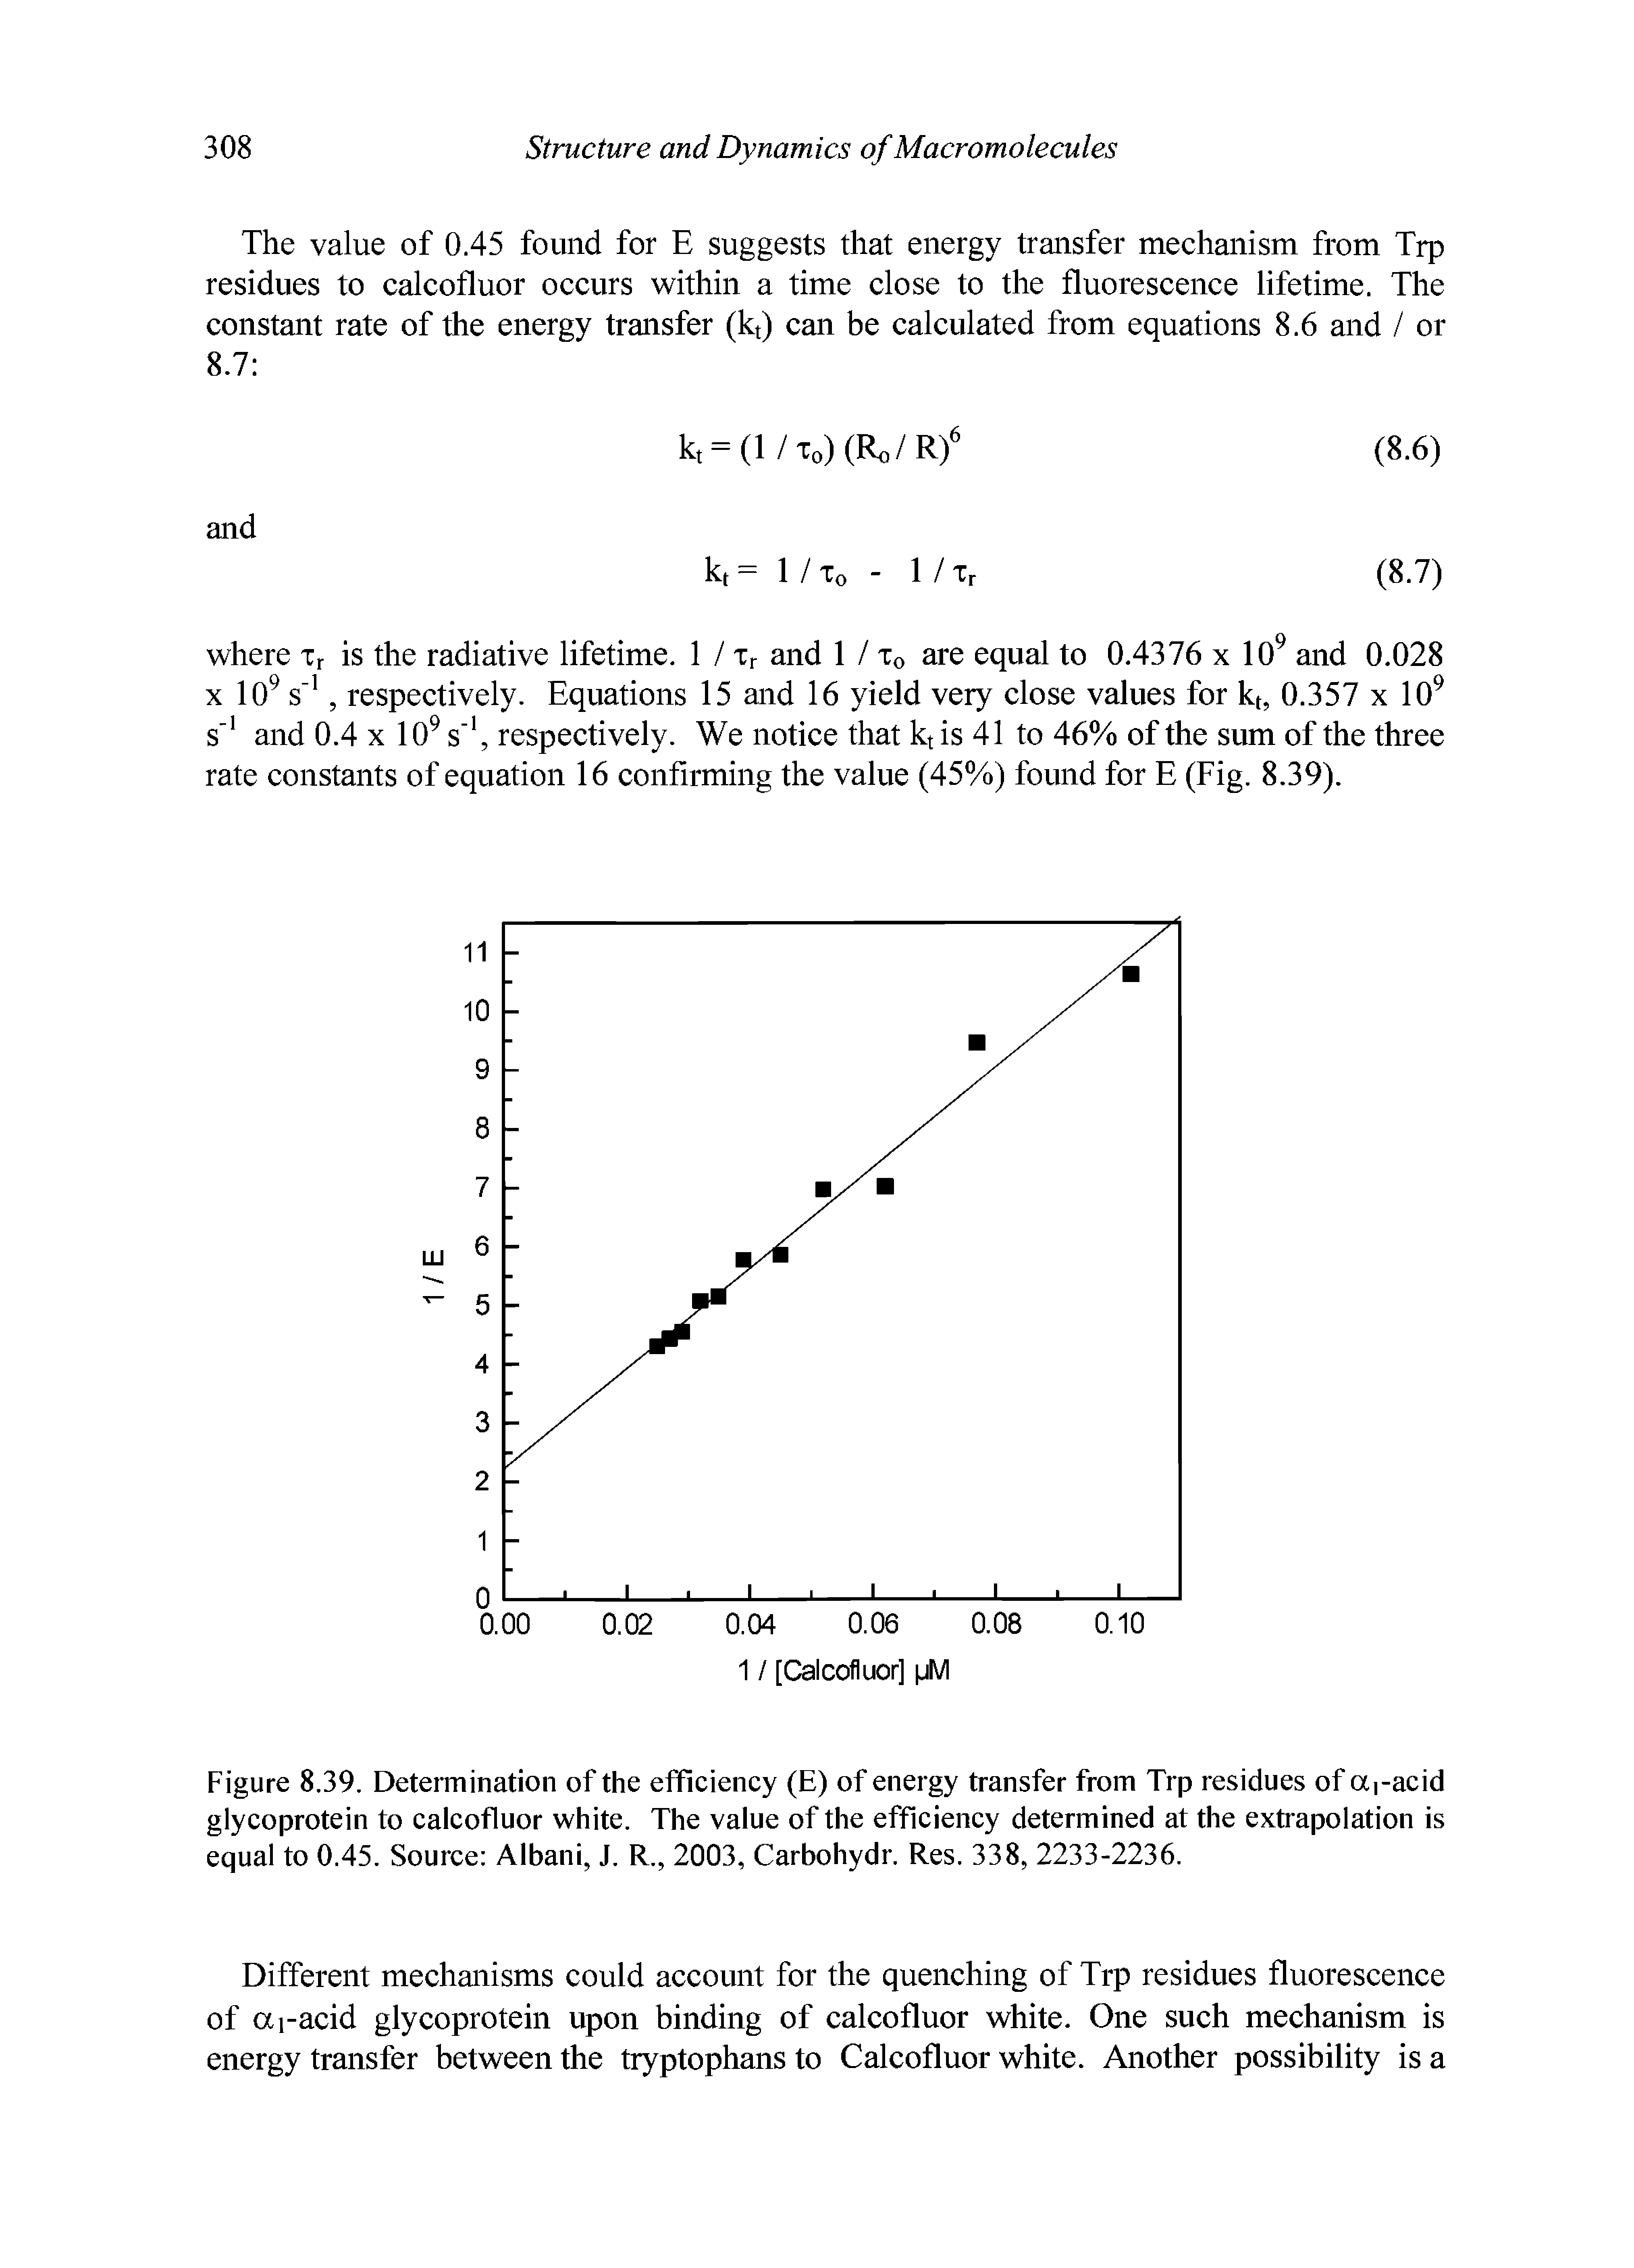 Figure 8.39. Determination of the efficiency (E) of energy transfer from Trp residues of ai-acid glycoprotein to calcofluor white. The value of the efficiency determined at the extrapolation is equal to 0.45. Source Albani, J. R., 2003, Carbohydr. Res. 338, 2233-2236.